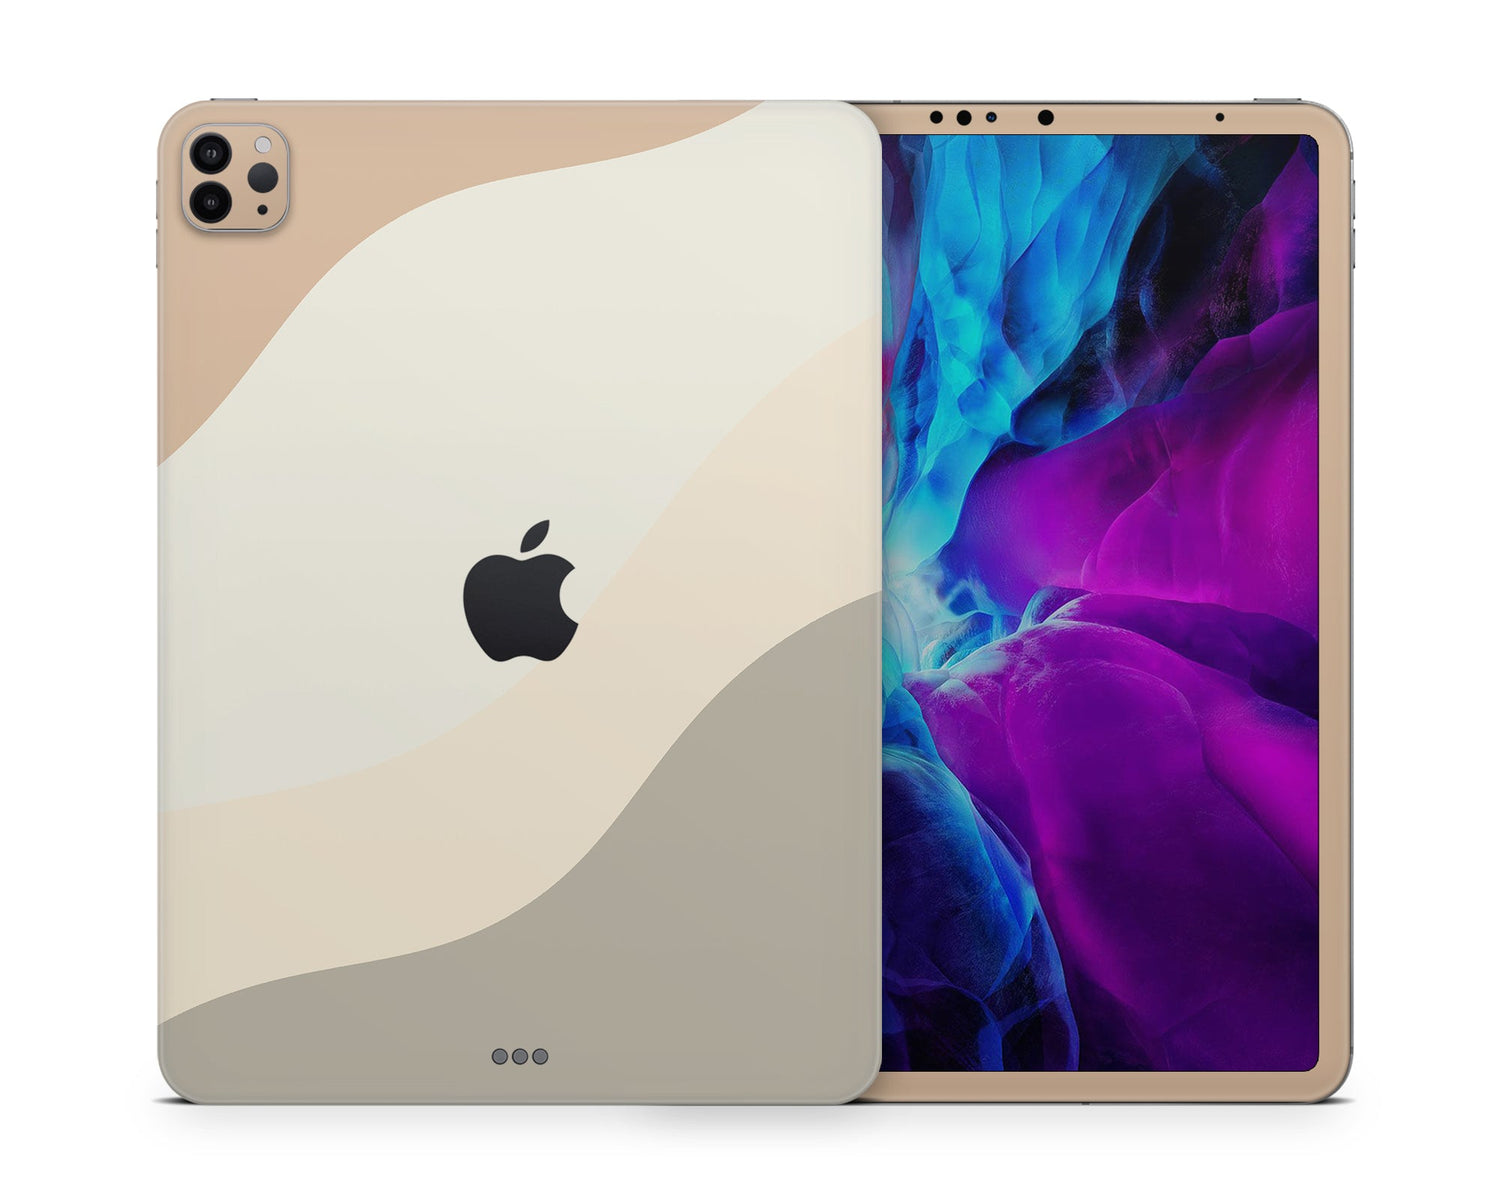 Lux Skins iPad Nordic Forest iPad Pro 12.9" Gen 5 Skins - Solid Colours Colour Blocking Skin